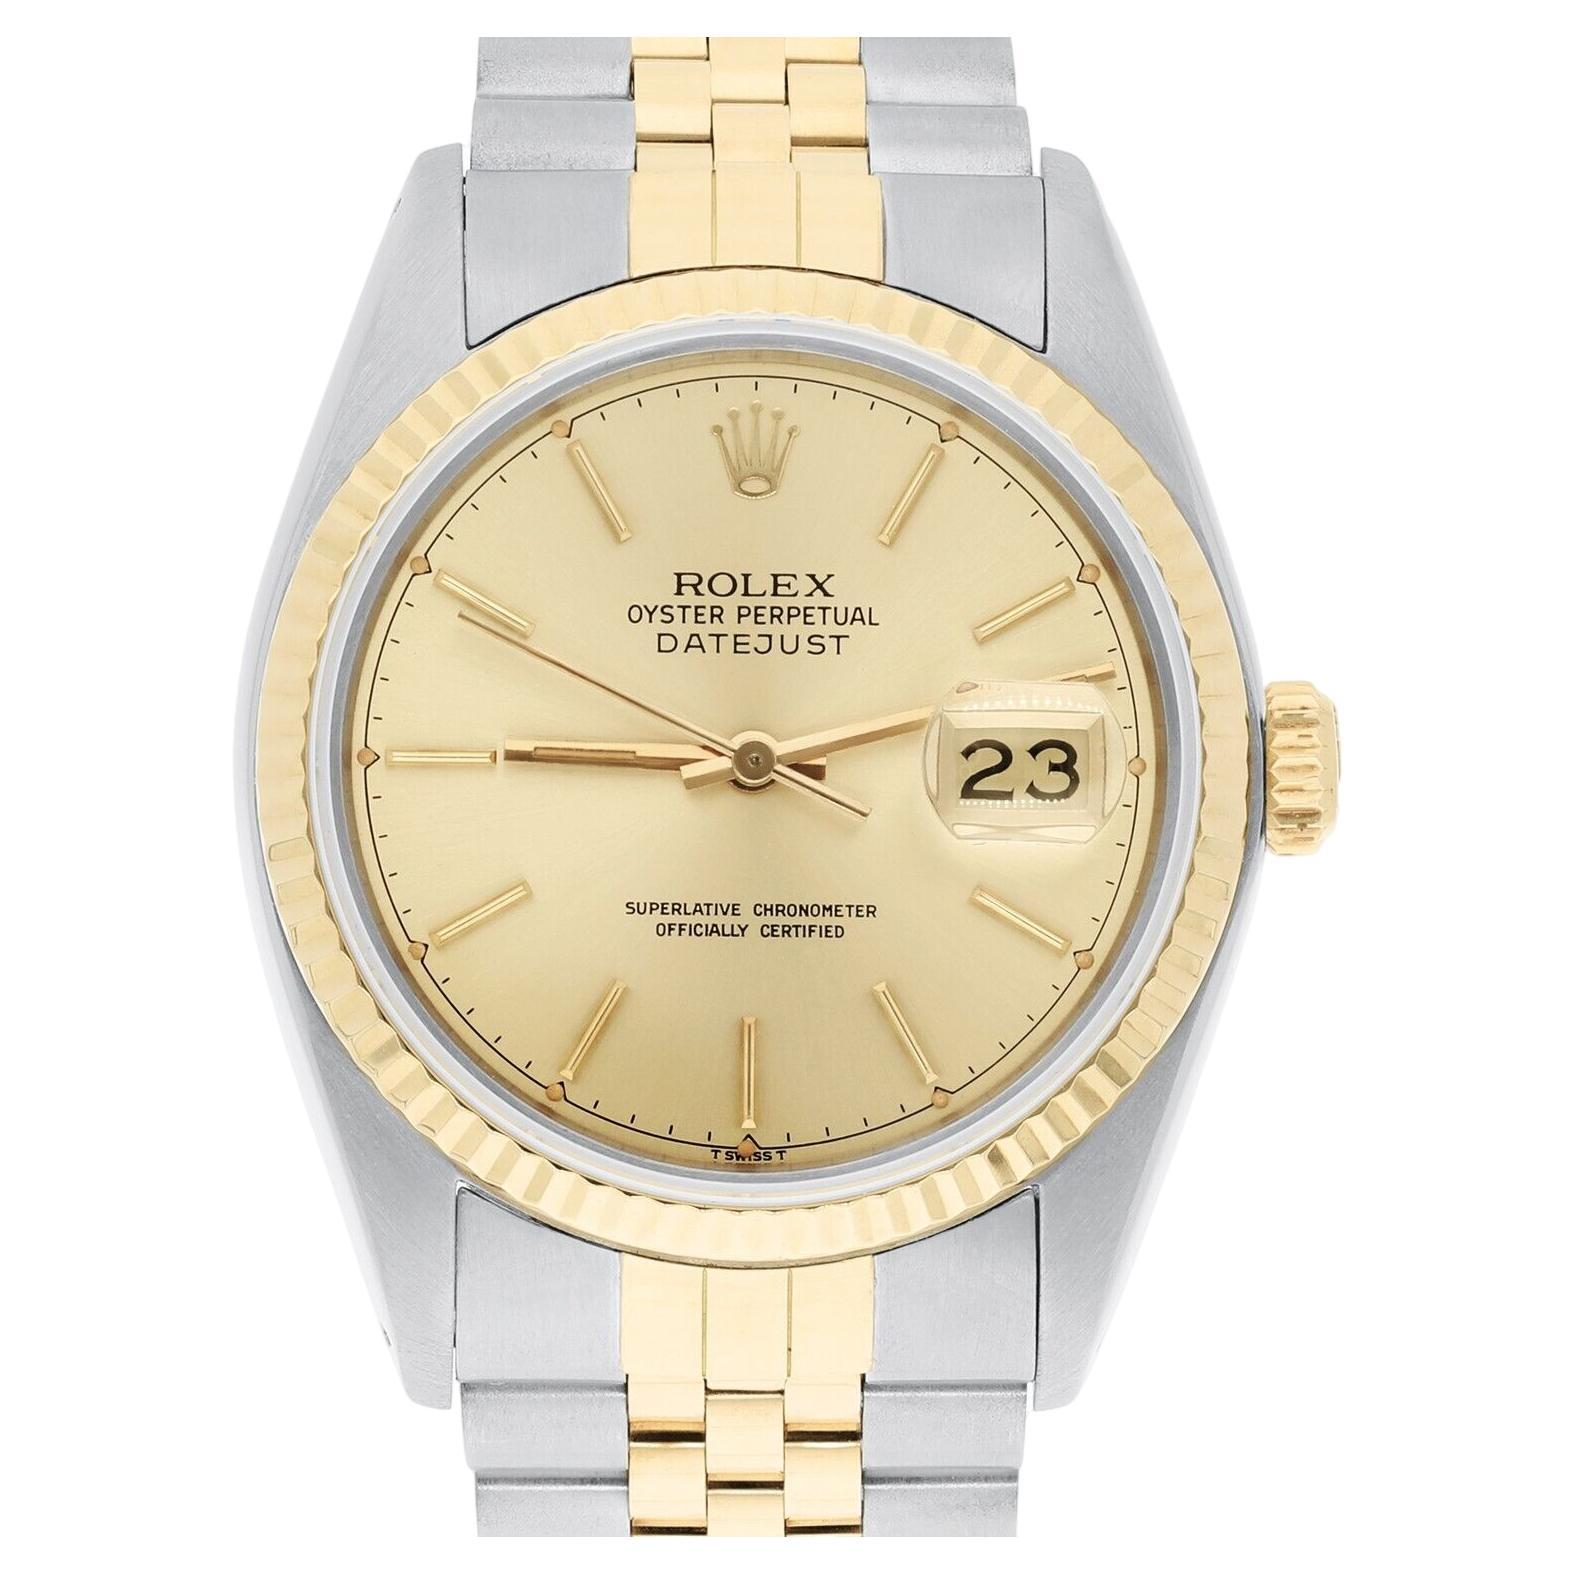 Rolex Datejust 36mm Two Tone Champagne Dial Jubilee Band 16013 Circa 1979 B/P